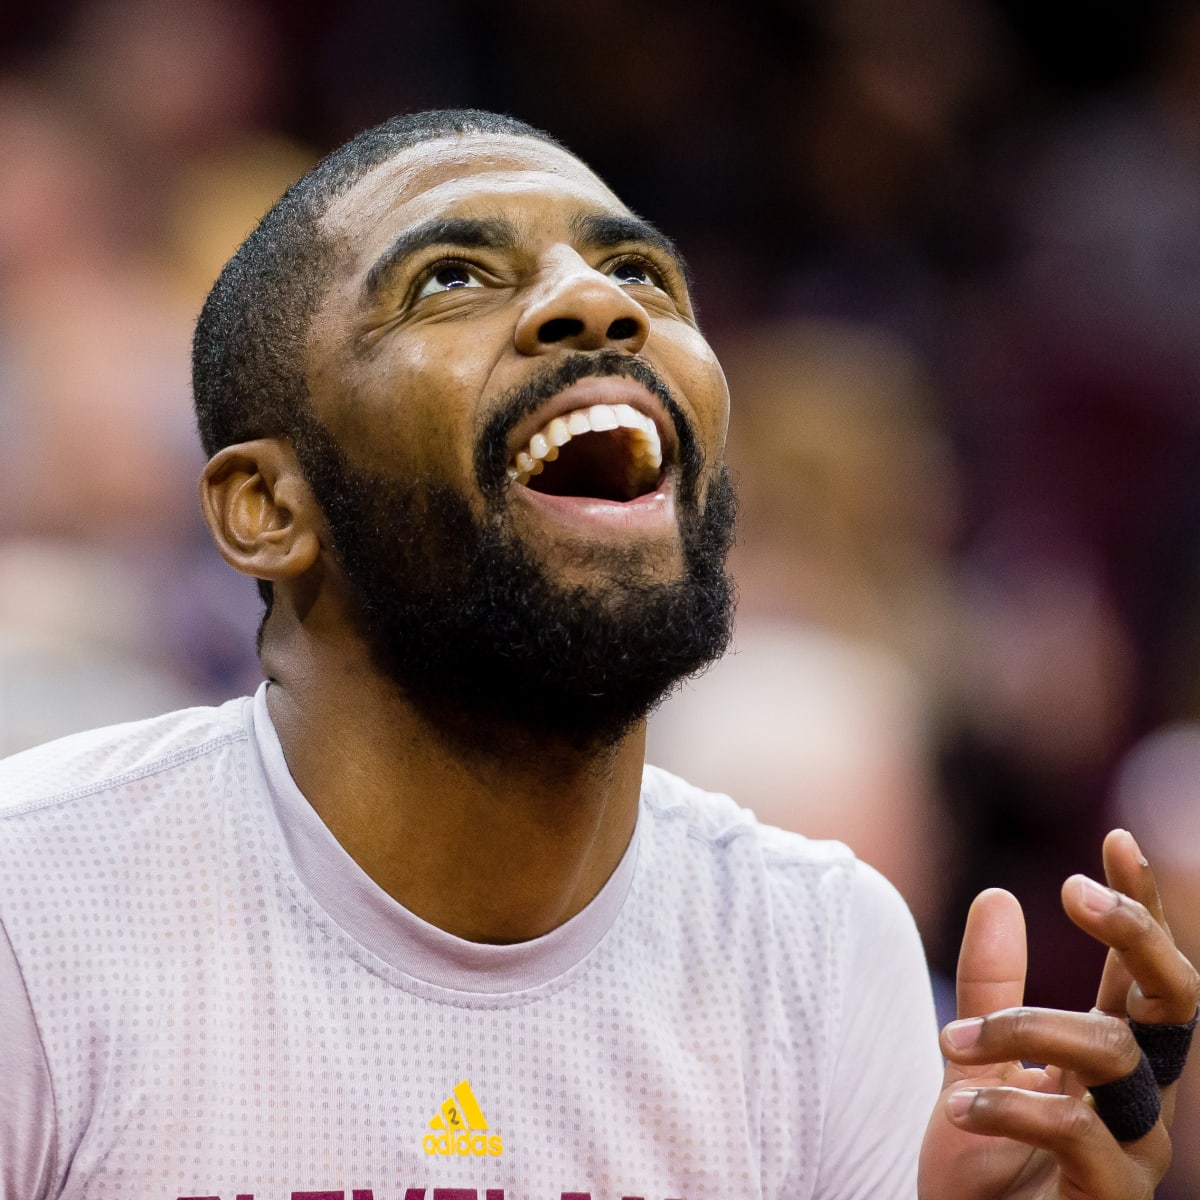 kyrie irving says the earth is flat